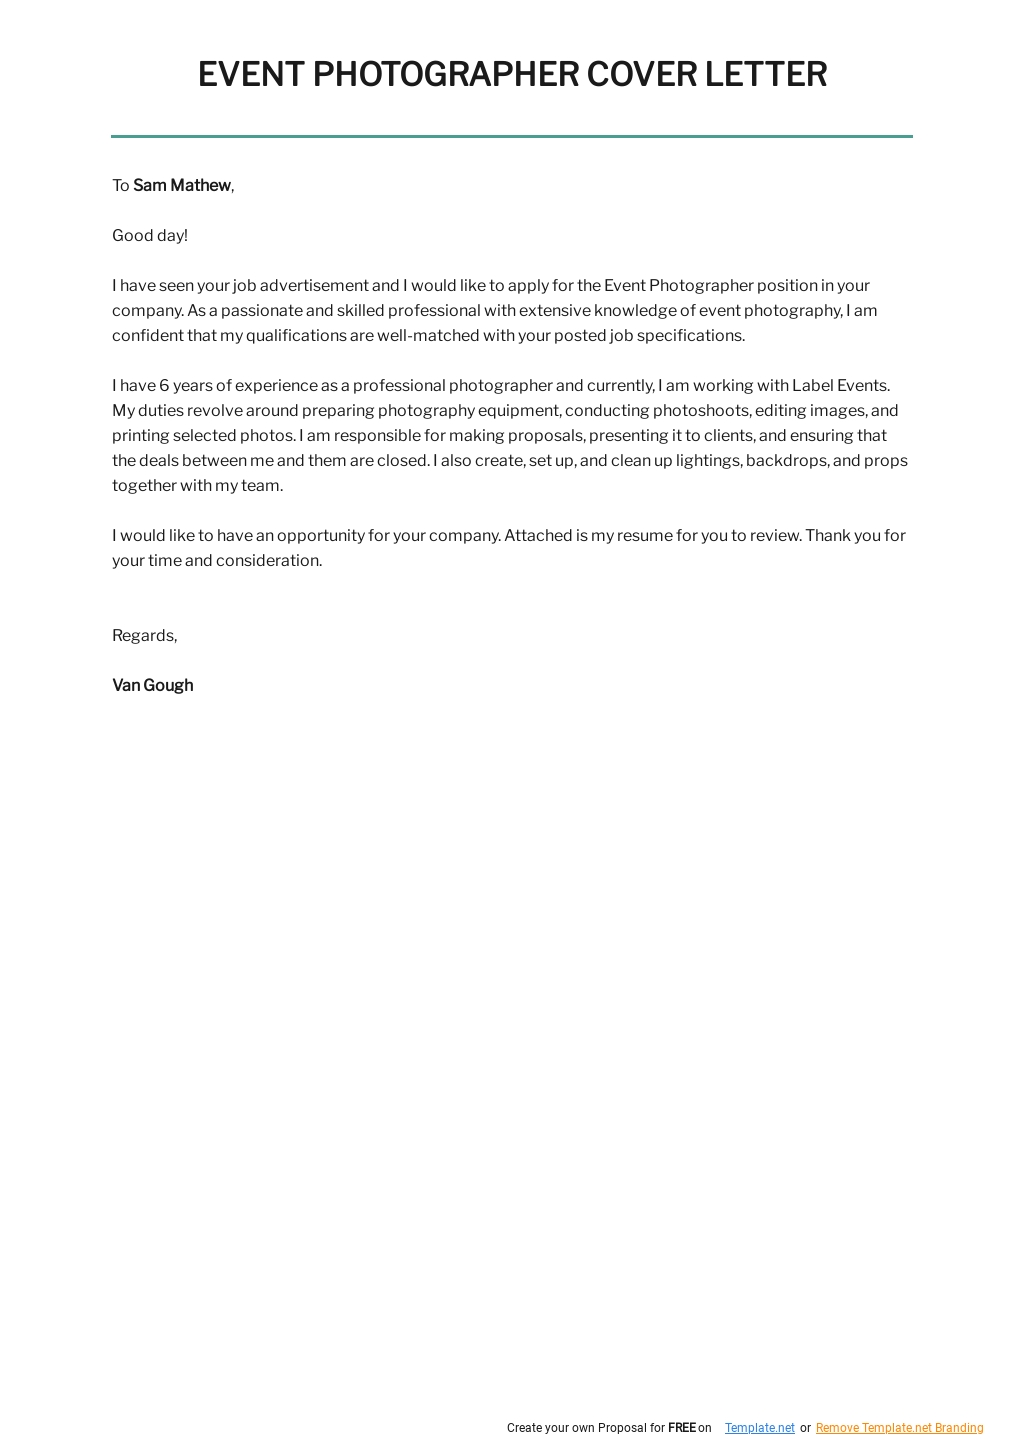 Event Photographer Cover Letter Template.jpe